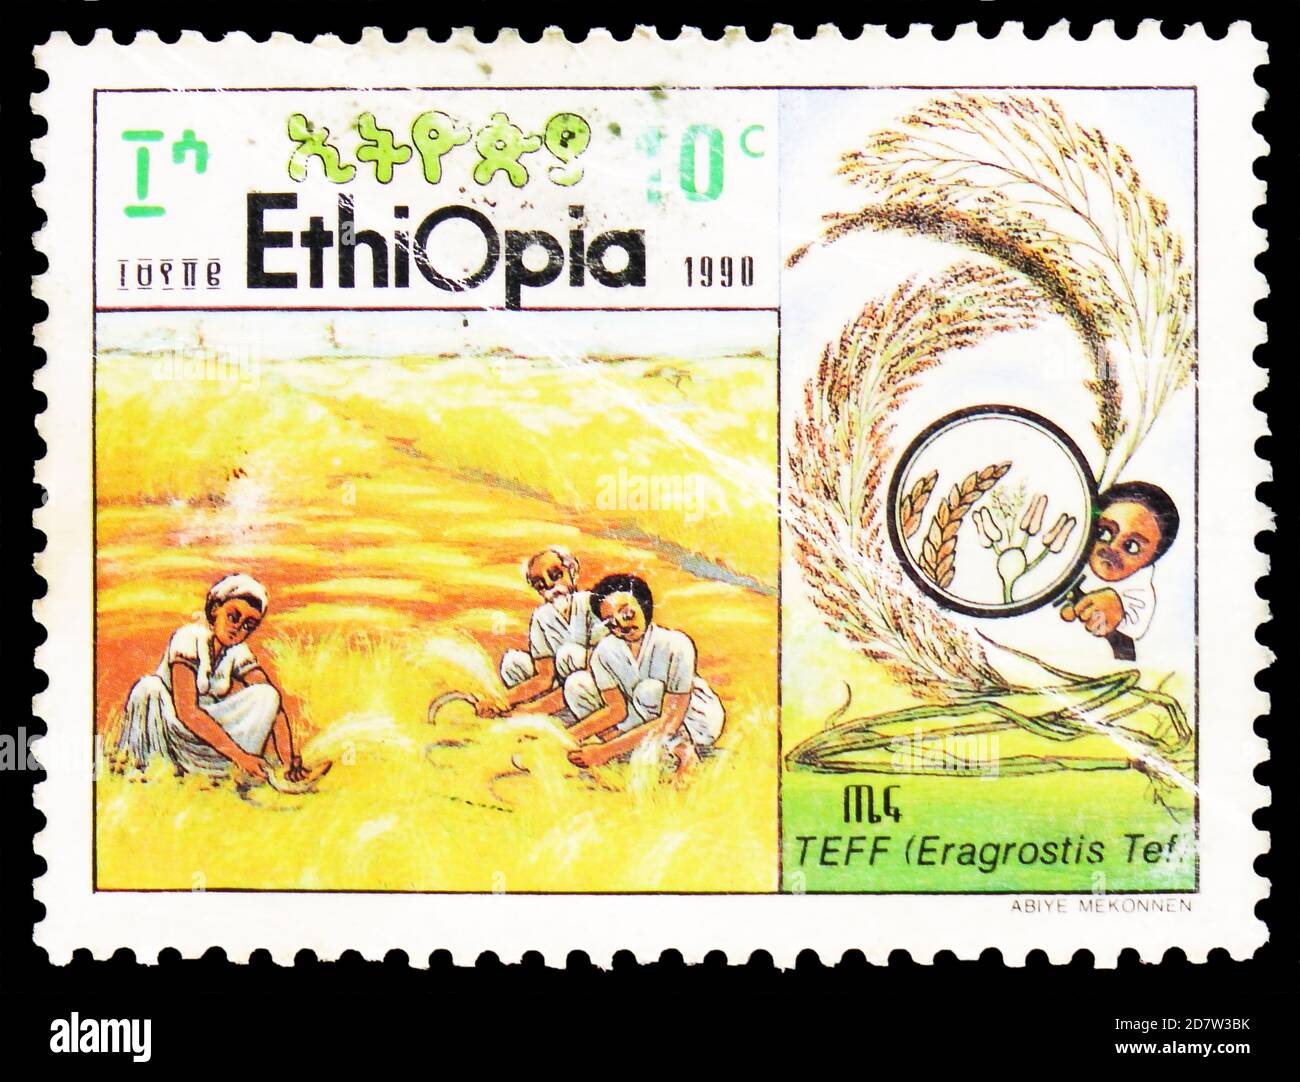 MOSCOW, RUSSIA - OCTOBER 9, 2020: Postage stamp printed in Ethiopia shows Harvest, Cultivation of cereal Tef (Eragrostis tef) serie, circa 1990 Stock Photo